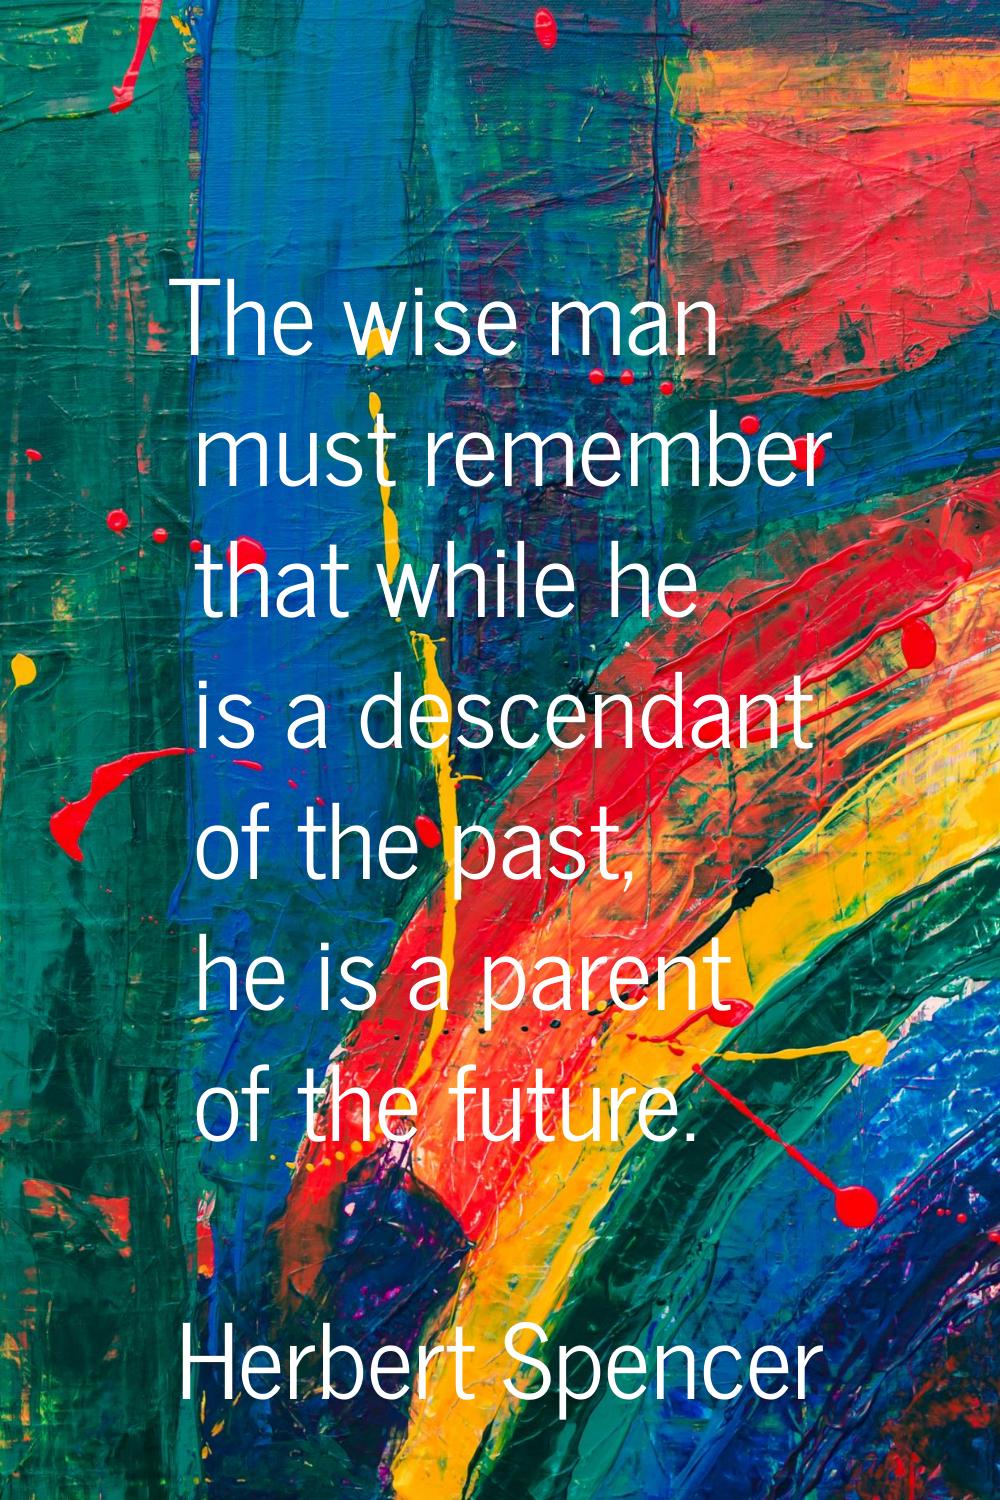 The wise man must remember that while he is a descendant of the past, he is a parent of the future.